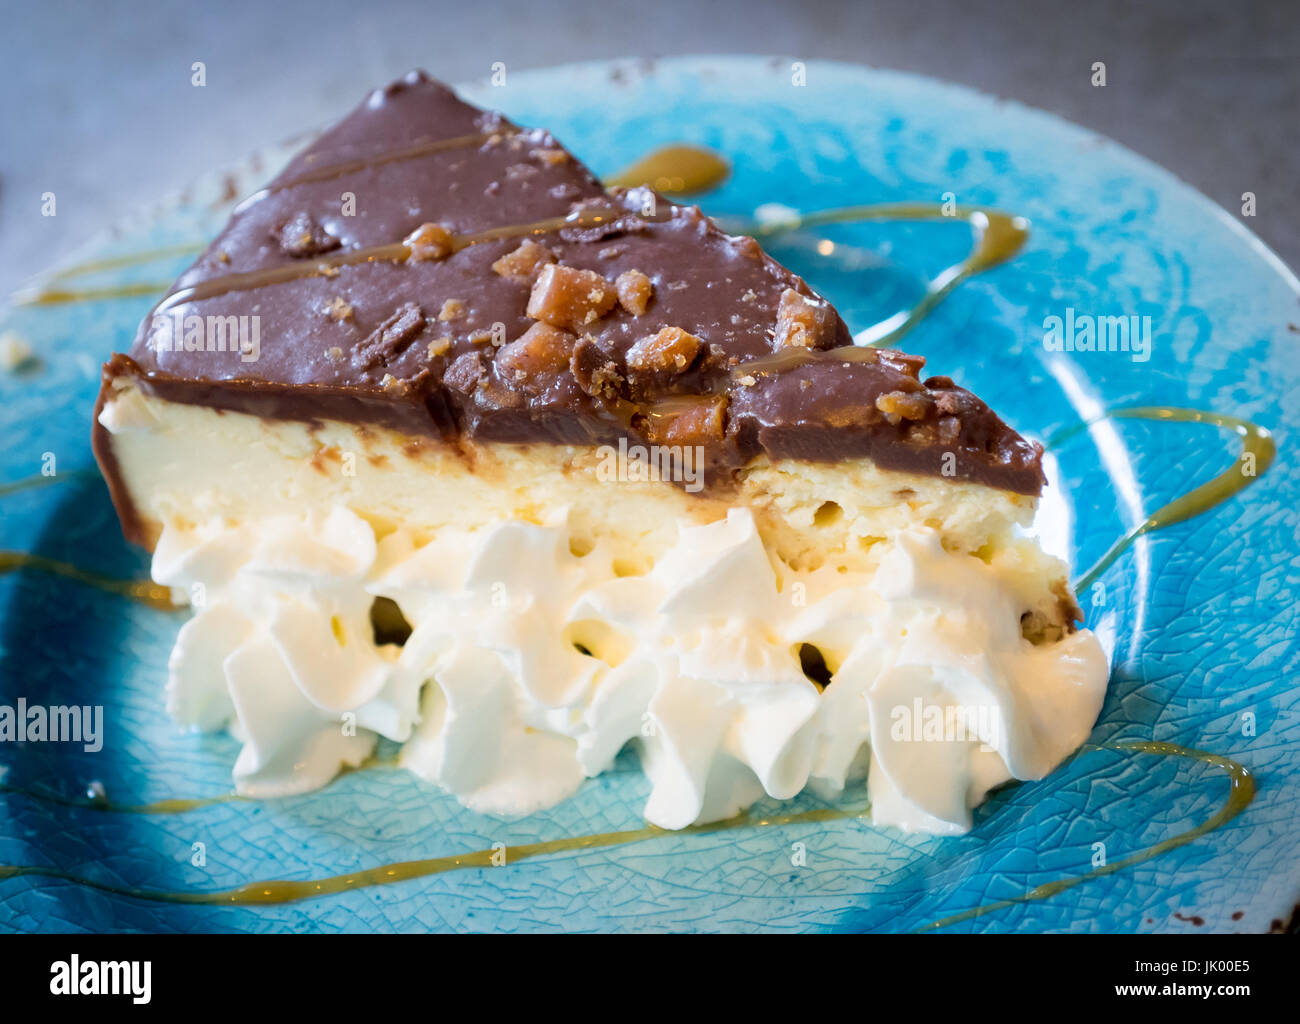 A decadent slice of s'mores cheescake from D'Lish by Tish Cafe in Saskatoon, Saskatchewan, Canada. Stock Photo